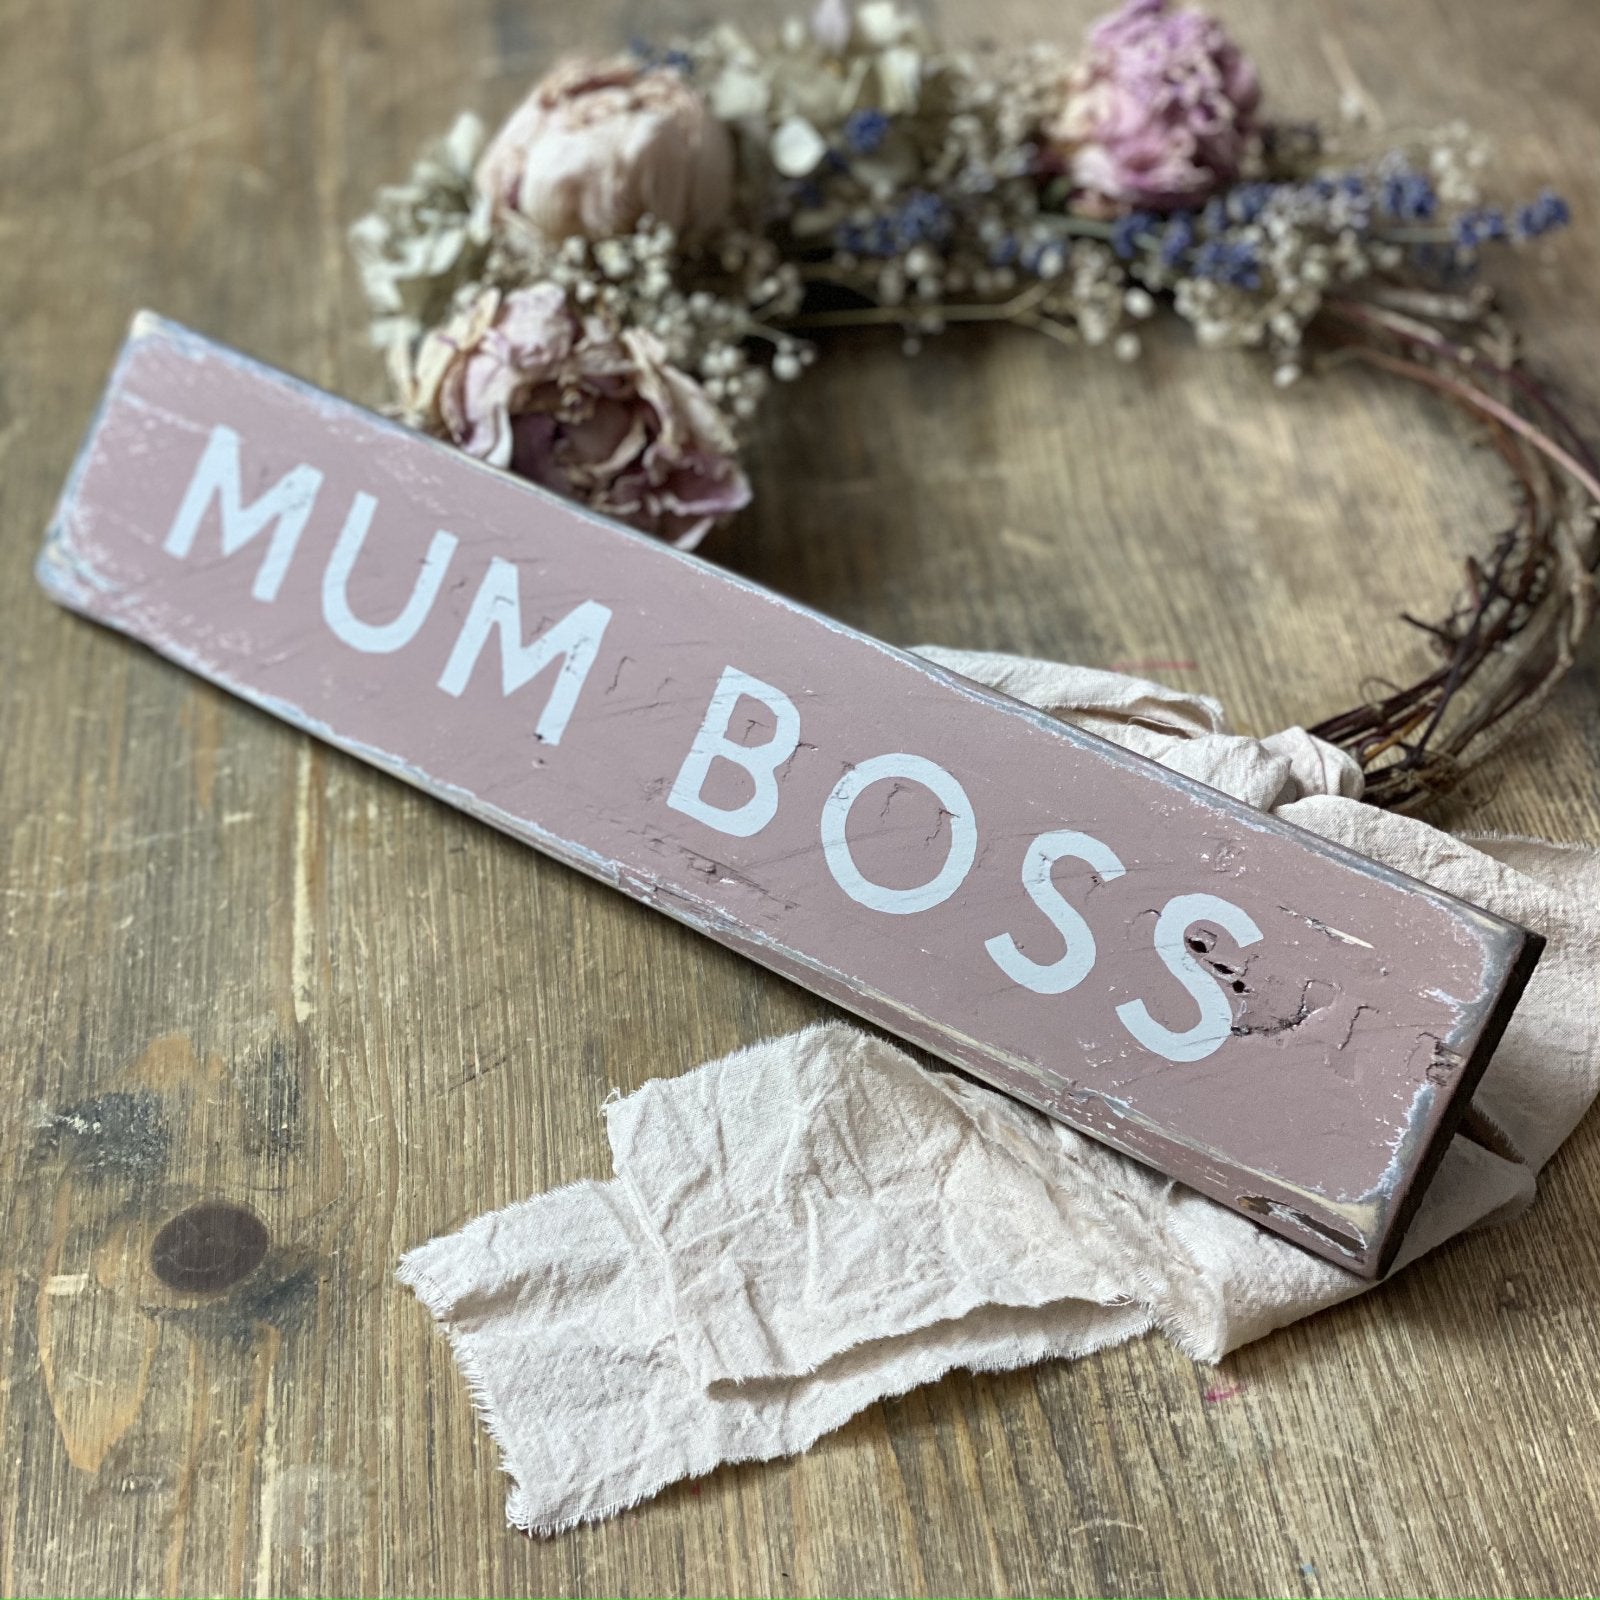 Mum Boss | Reclaimed Wood Sign | Ready Now - The Imperfect Wood Company - Reclaimed Wood Sign